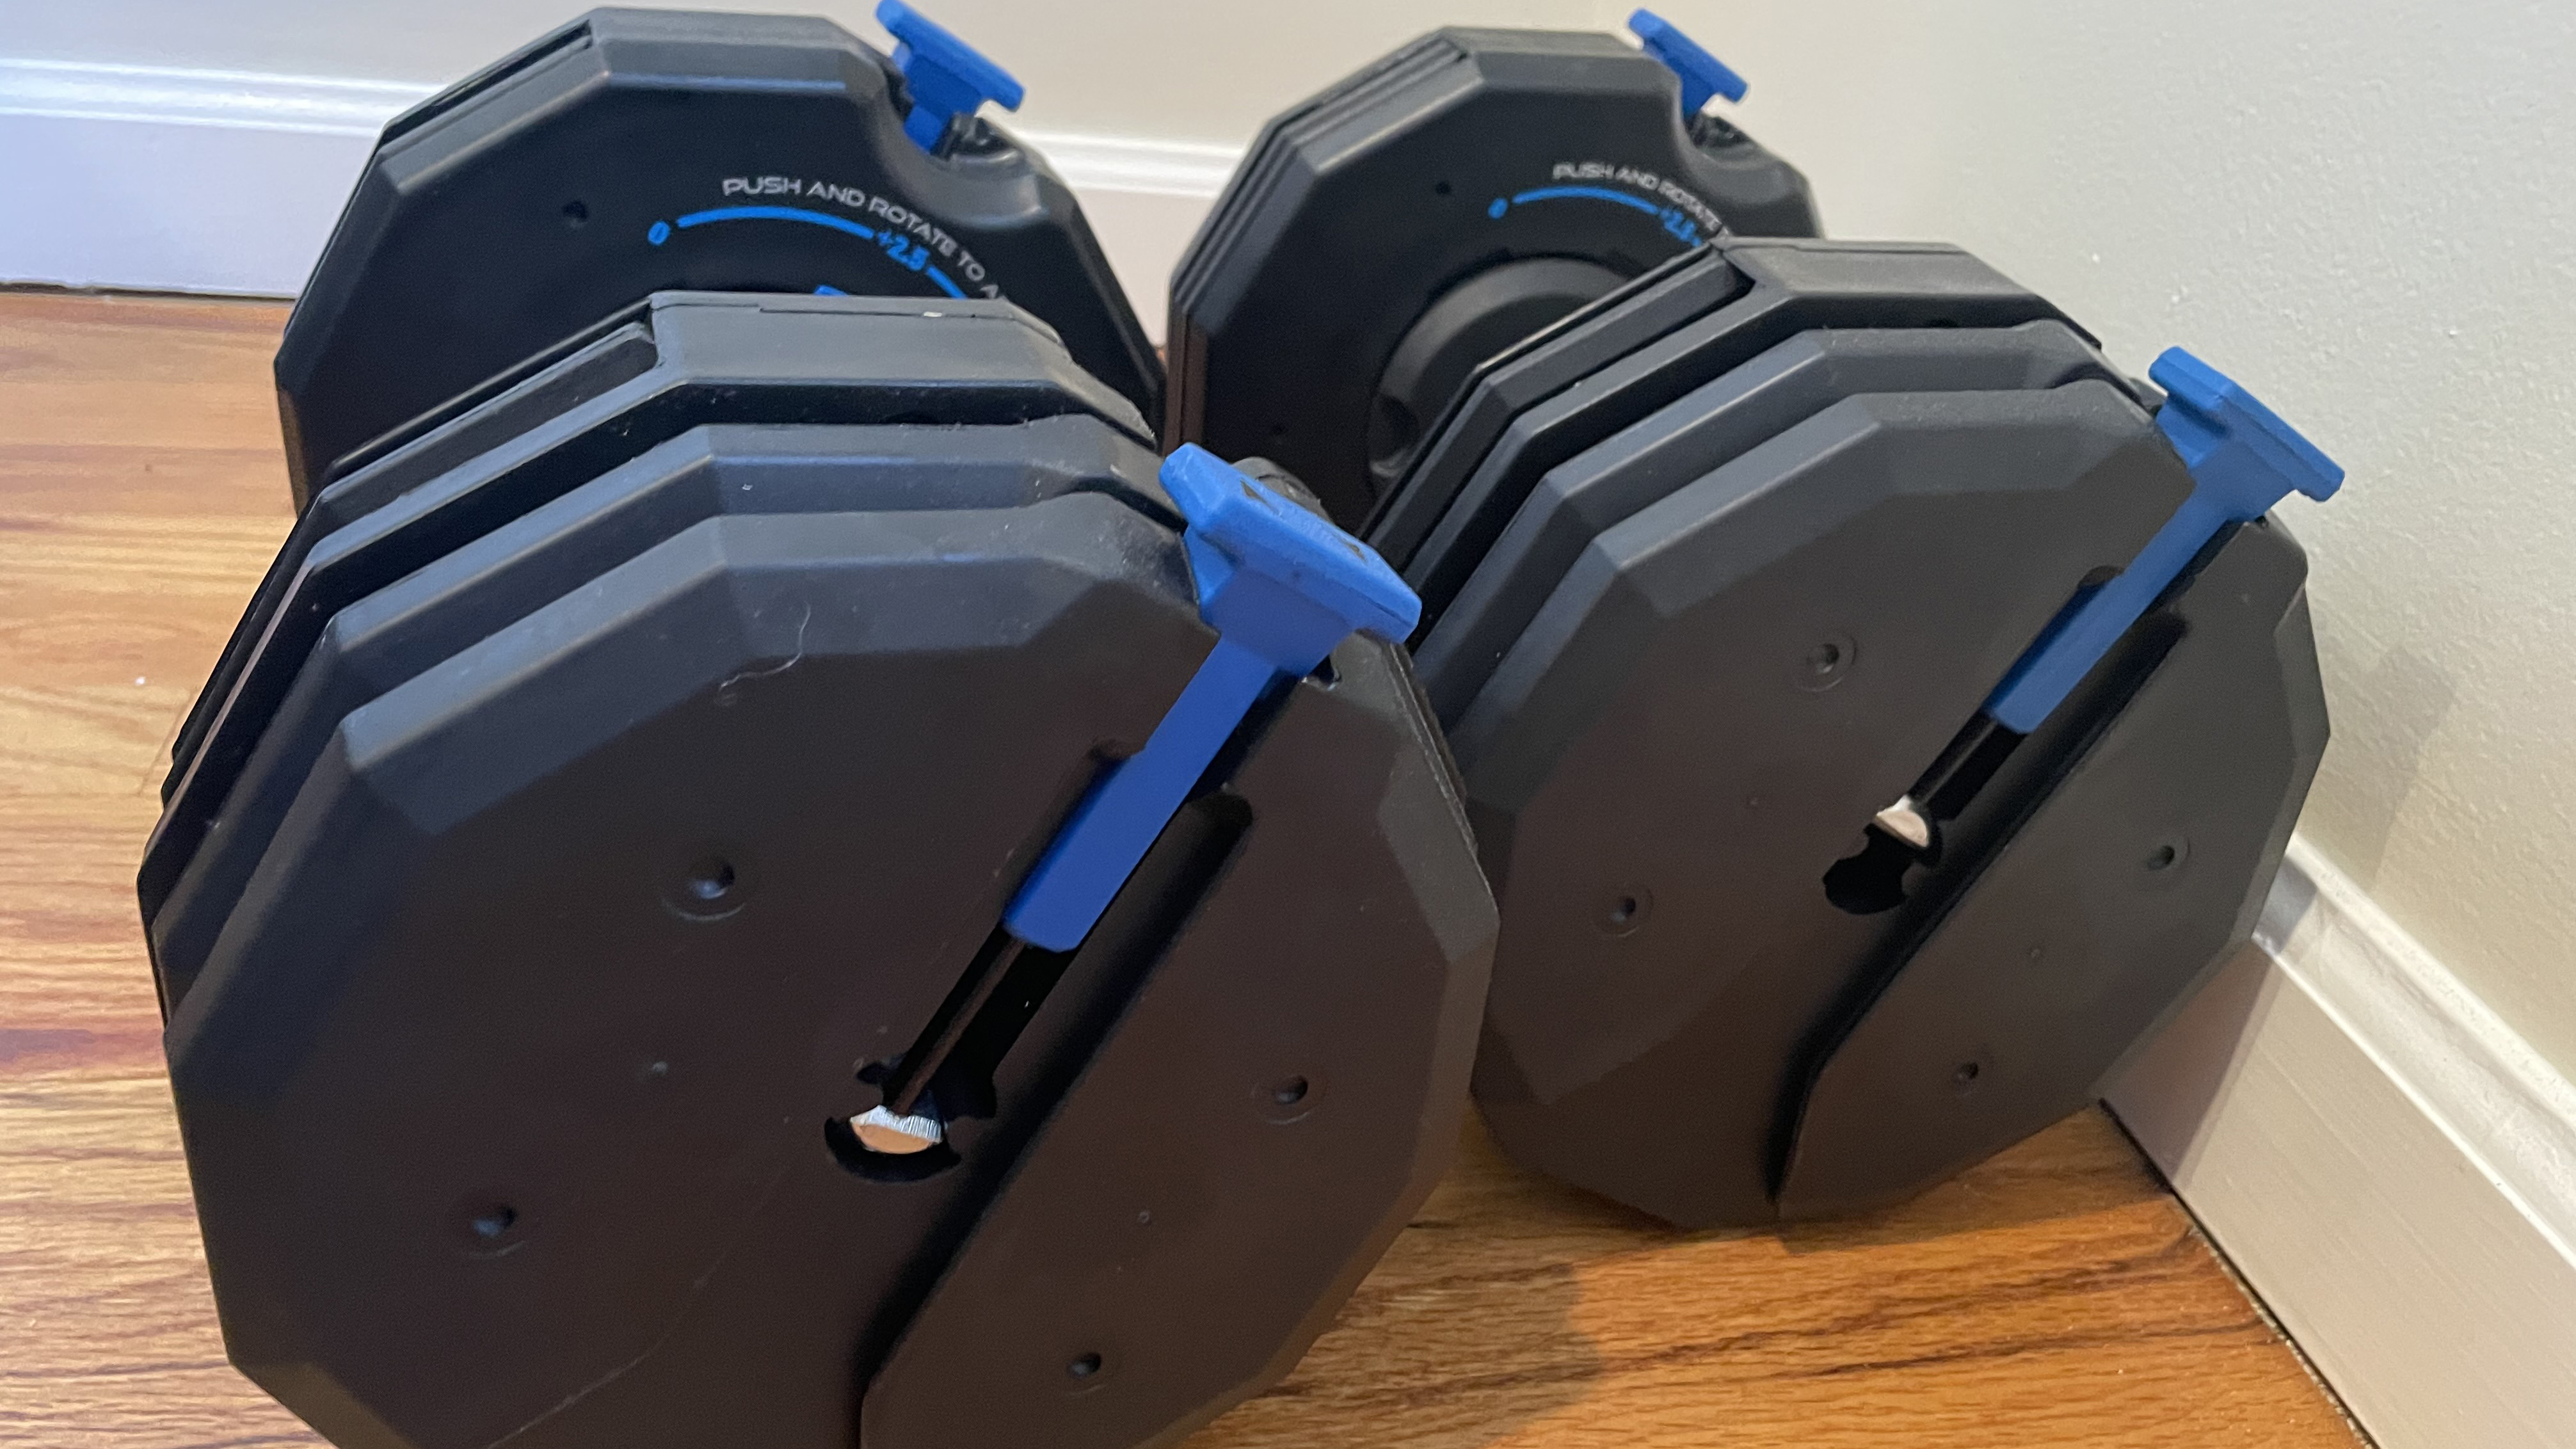 NordicTrack select-a-weight dumbbells from side angle